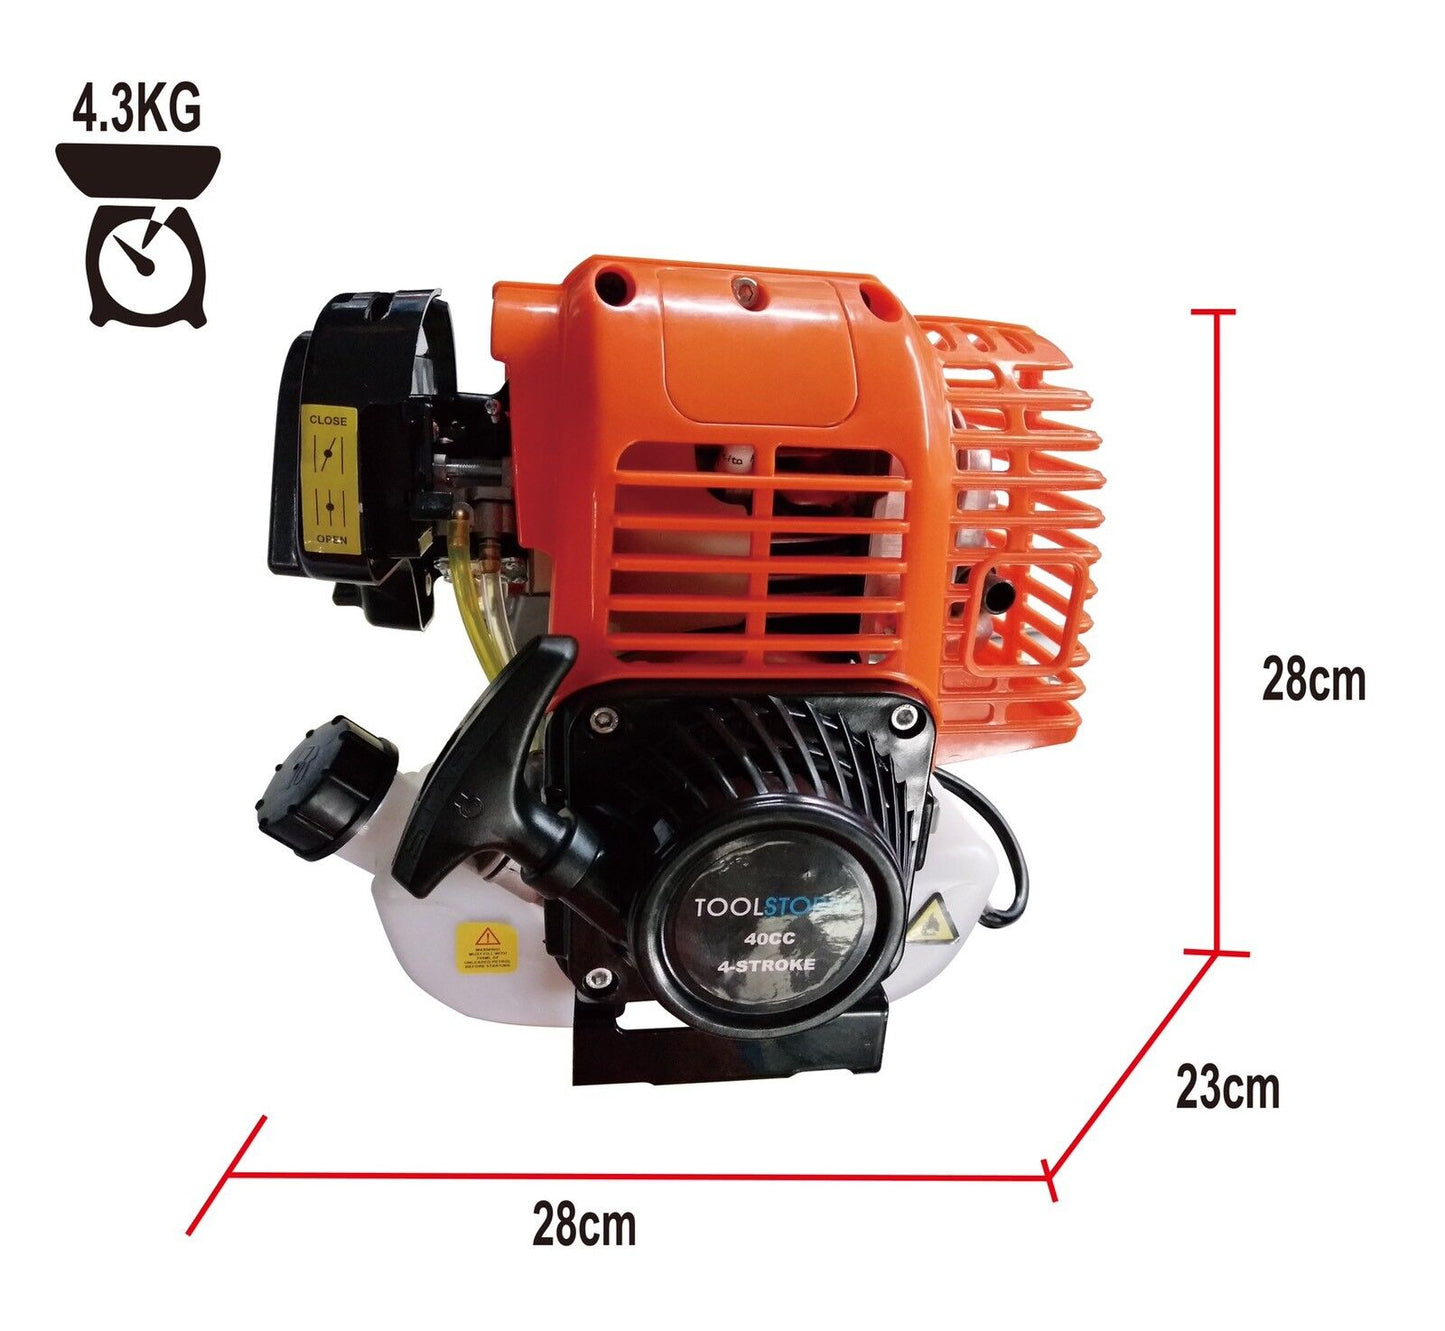 4 Stroke Engine Motor for Pole Tool Chainsaw Brushcutter Trimmer Brush Cutter